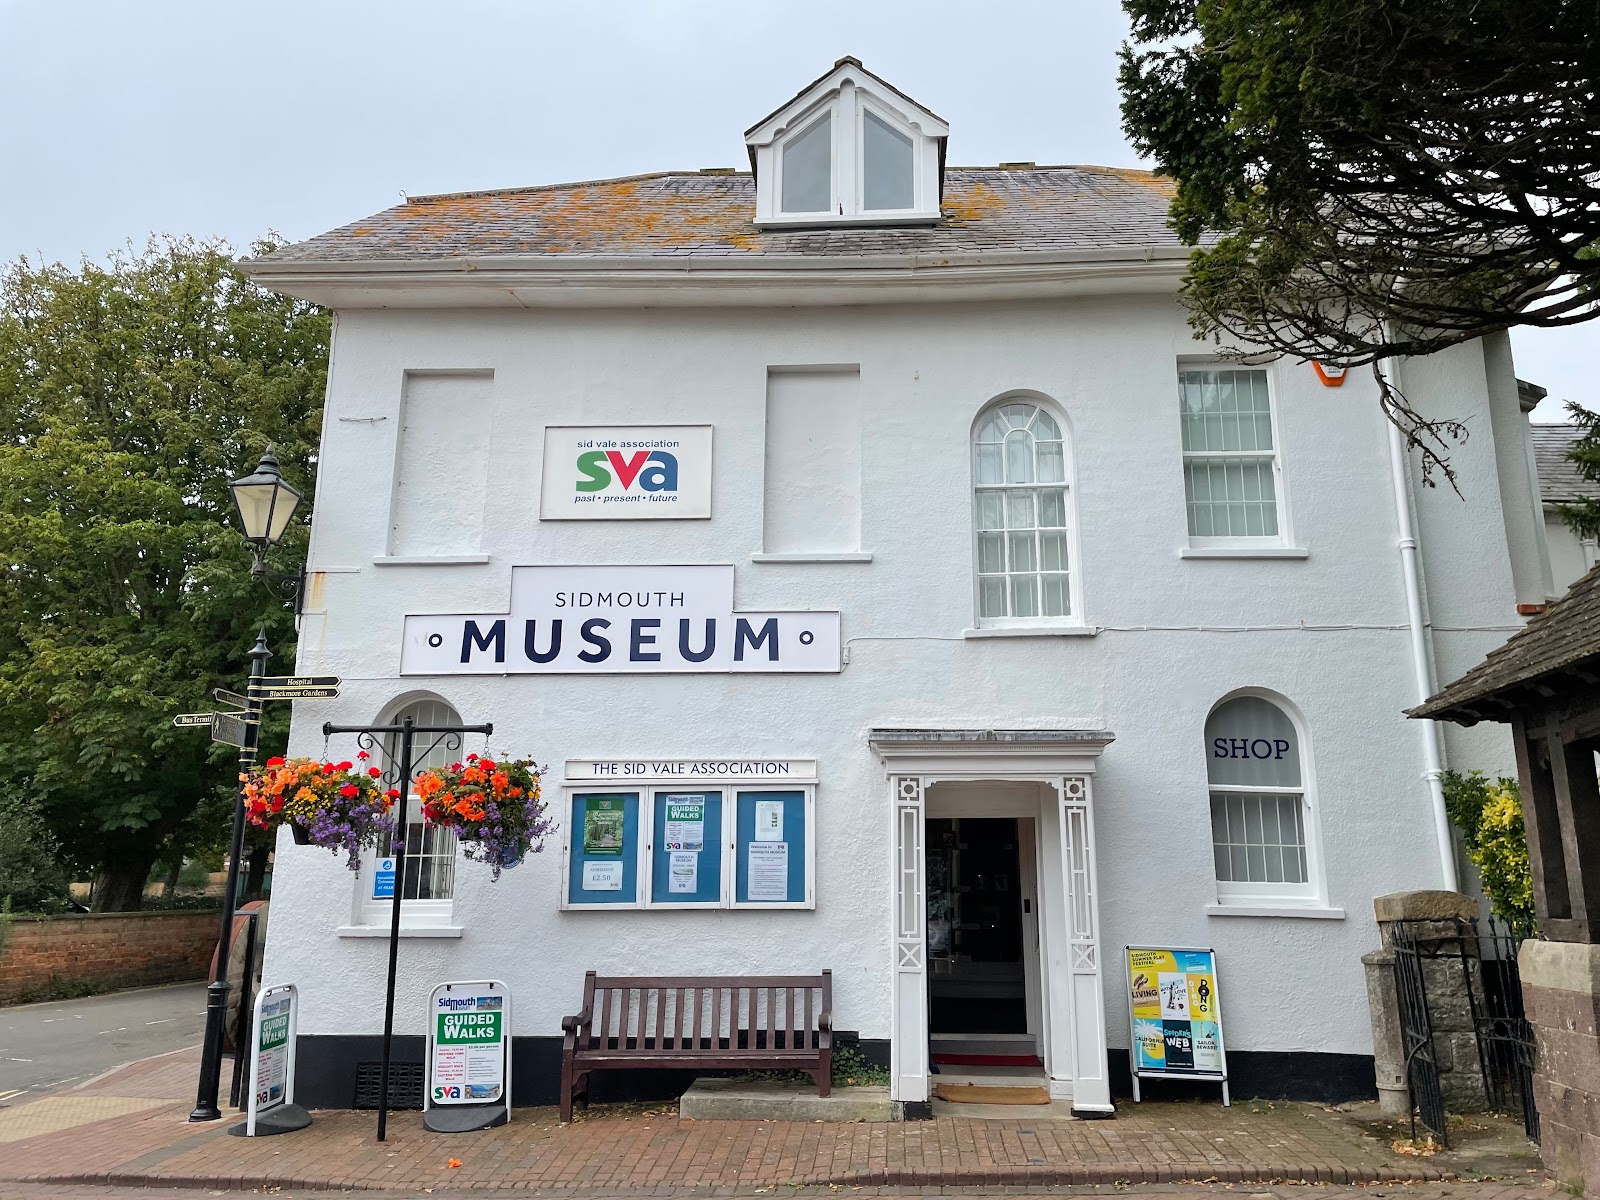 https://whatremovals.co.uk/wp-content/uploads/2022/02/Sidmouth Museum-300x225.jpeg